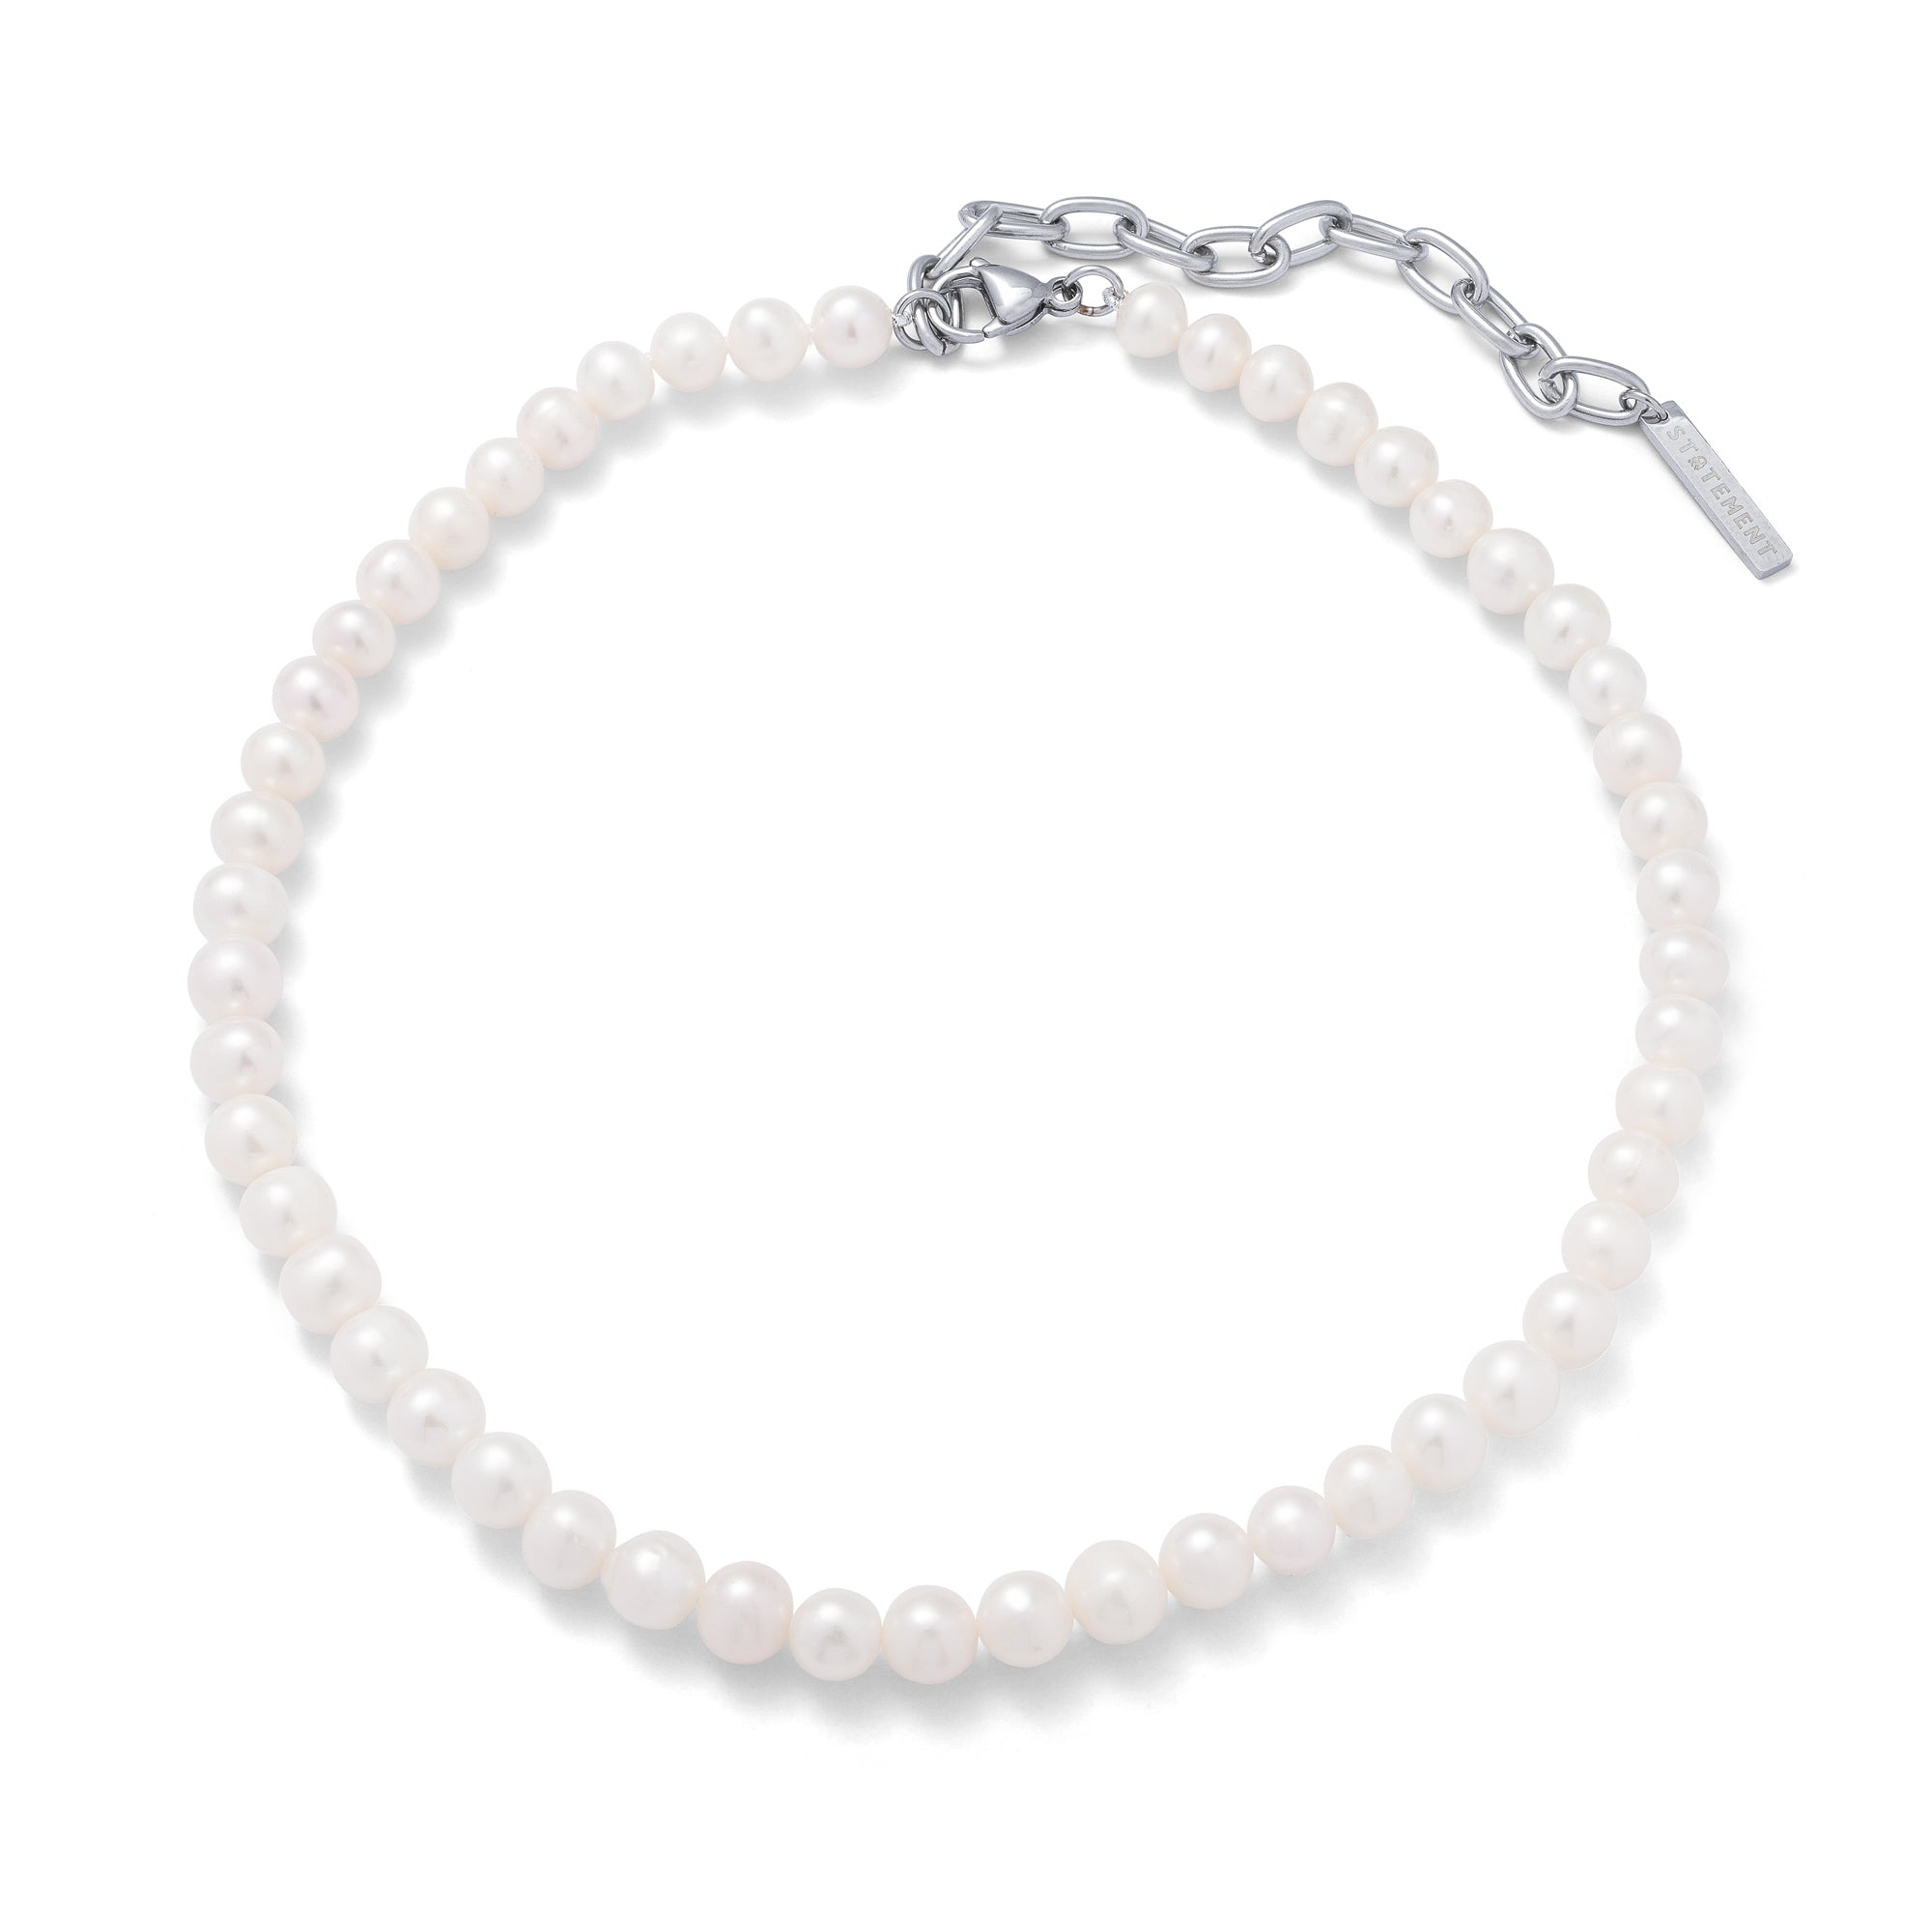 Statement Collective - Freshwater Pearl Necklace (8mm)